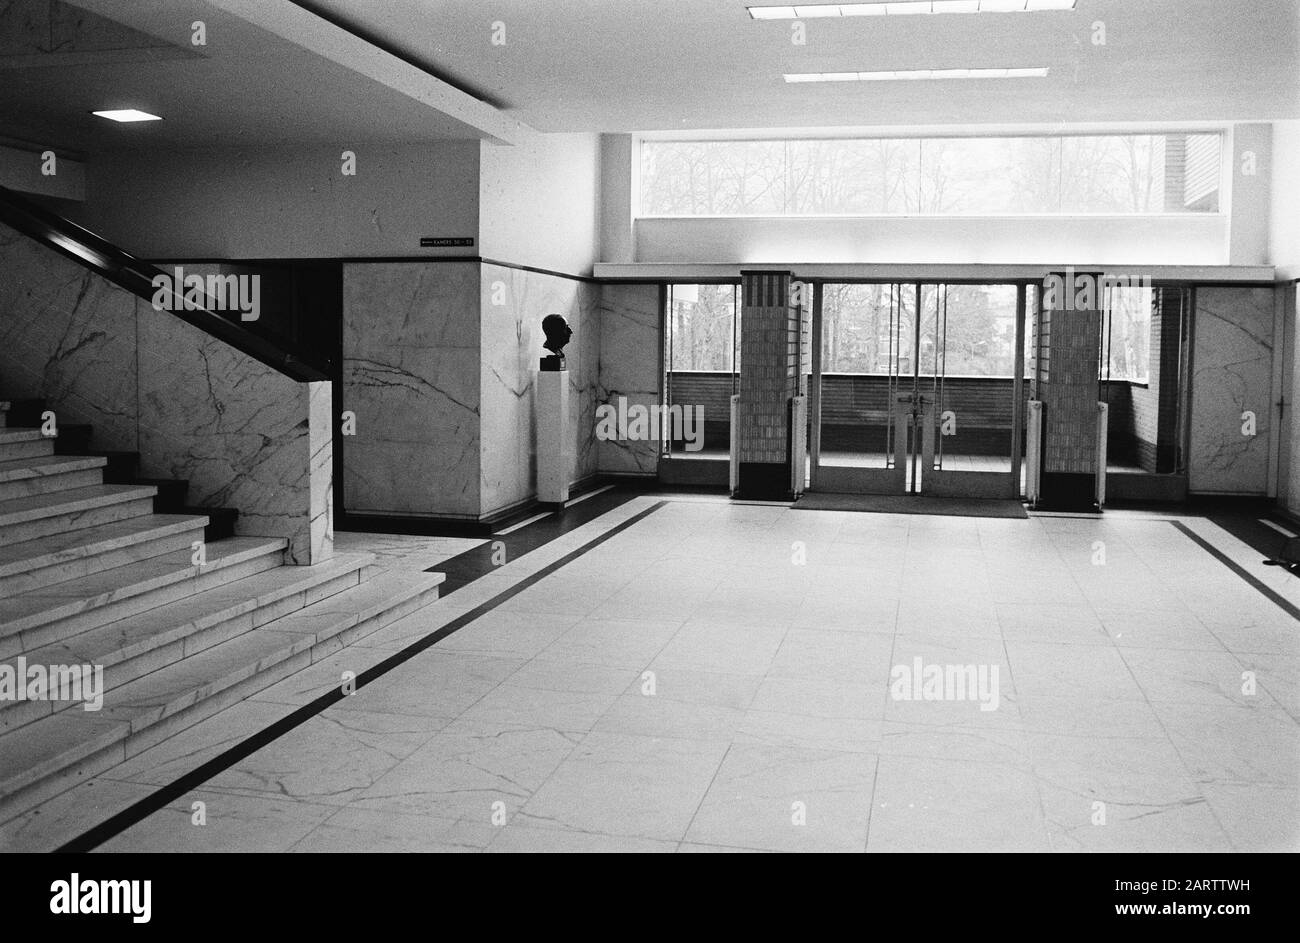 City Hall in Hilversum by architect W.M. Dudok, interior Date: December 6, 1974 Location: Hilversum, Noord-Holland Keywords: architecture, buildings, town halls, stairs Stock Photo